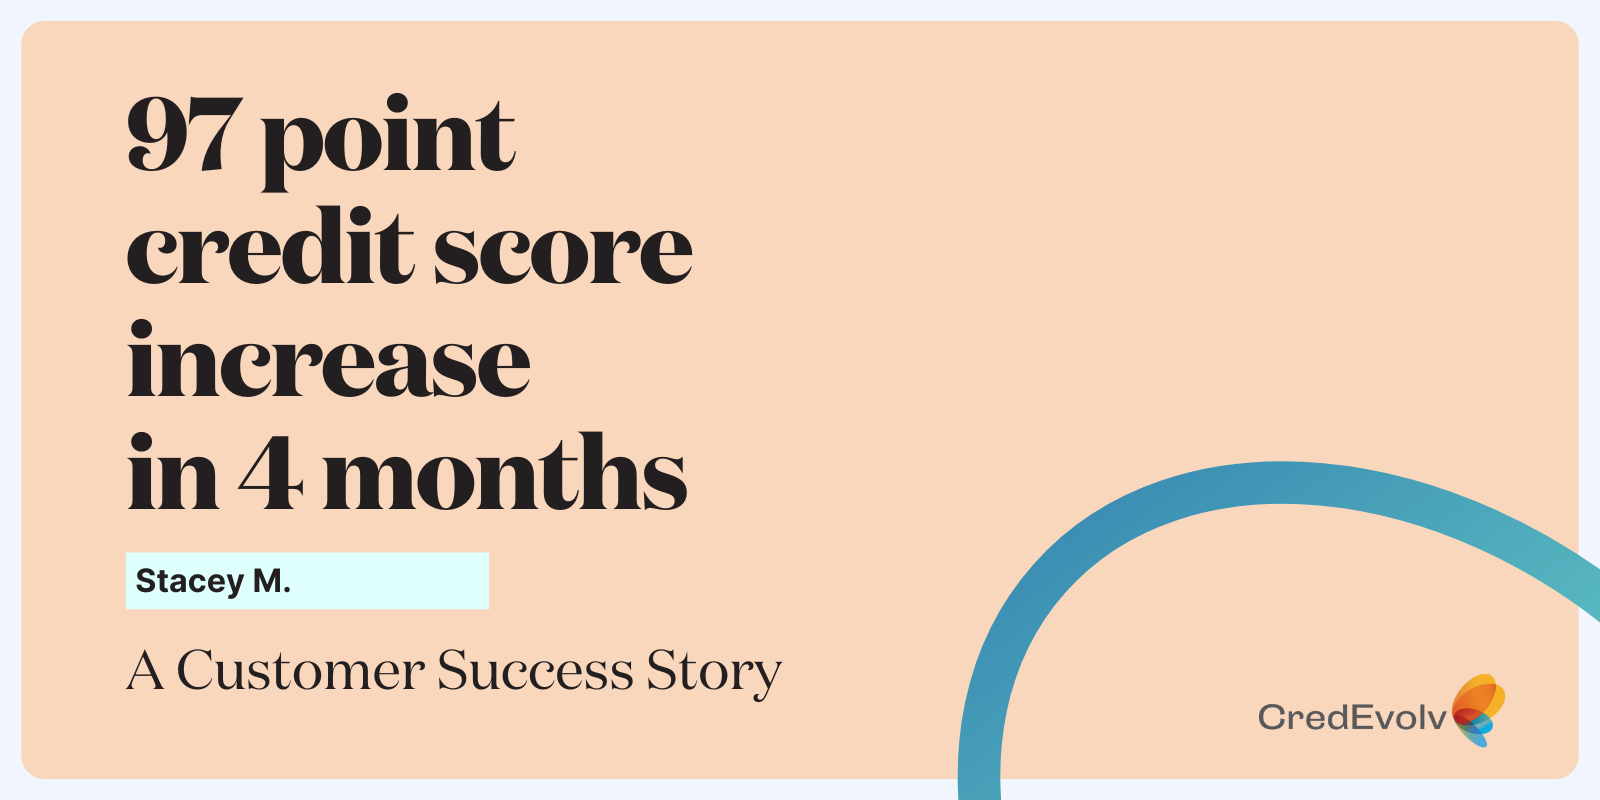 Credit Success Story - 97 point credit score increase in 4 months - blog graphic